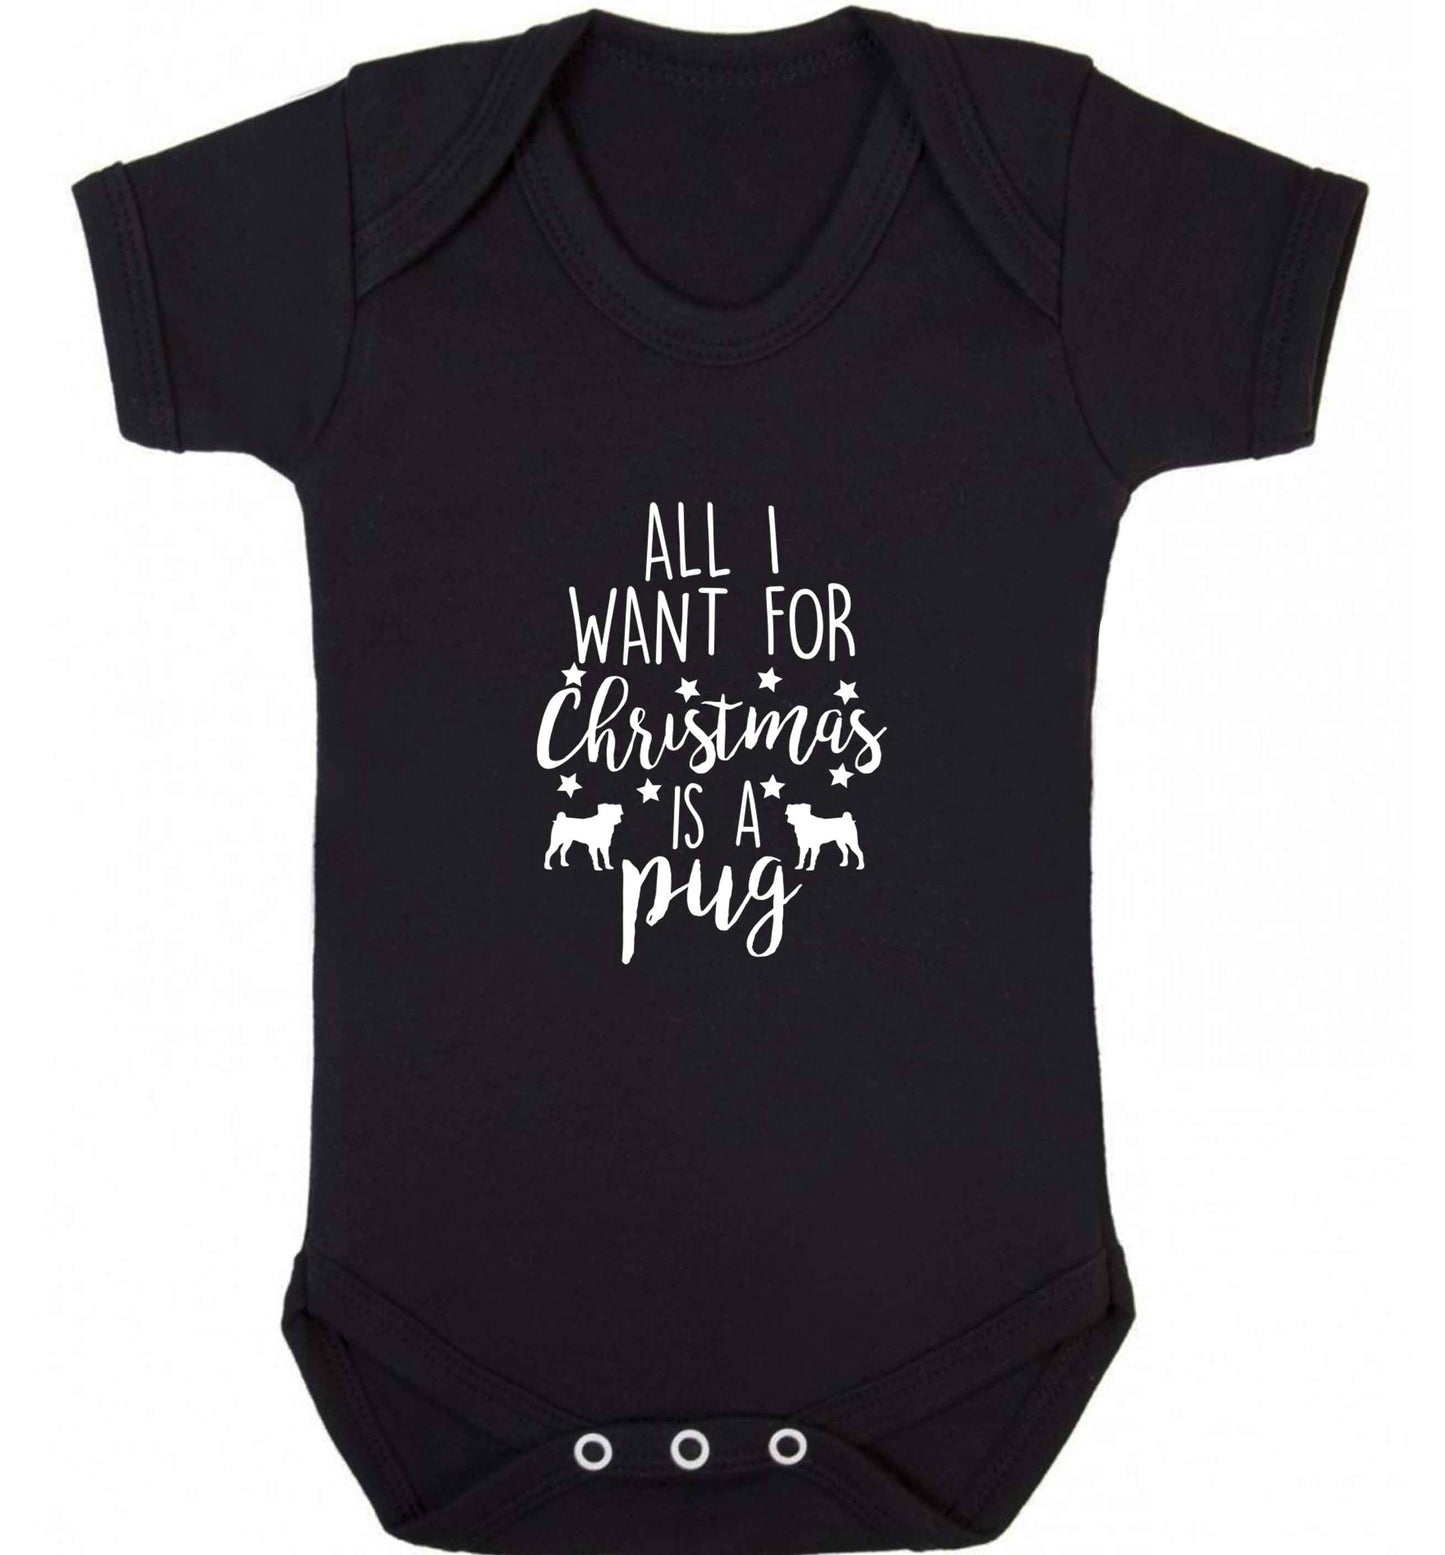 All I want for Christmas is a pug baby vest black 18-24 months